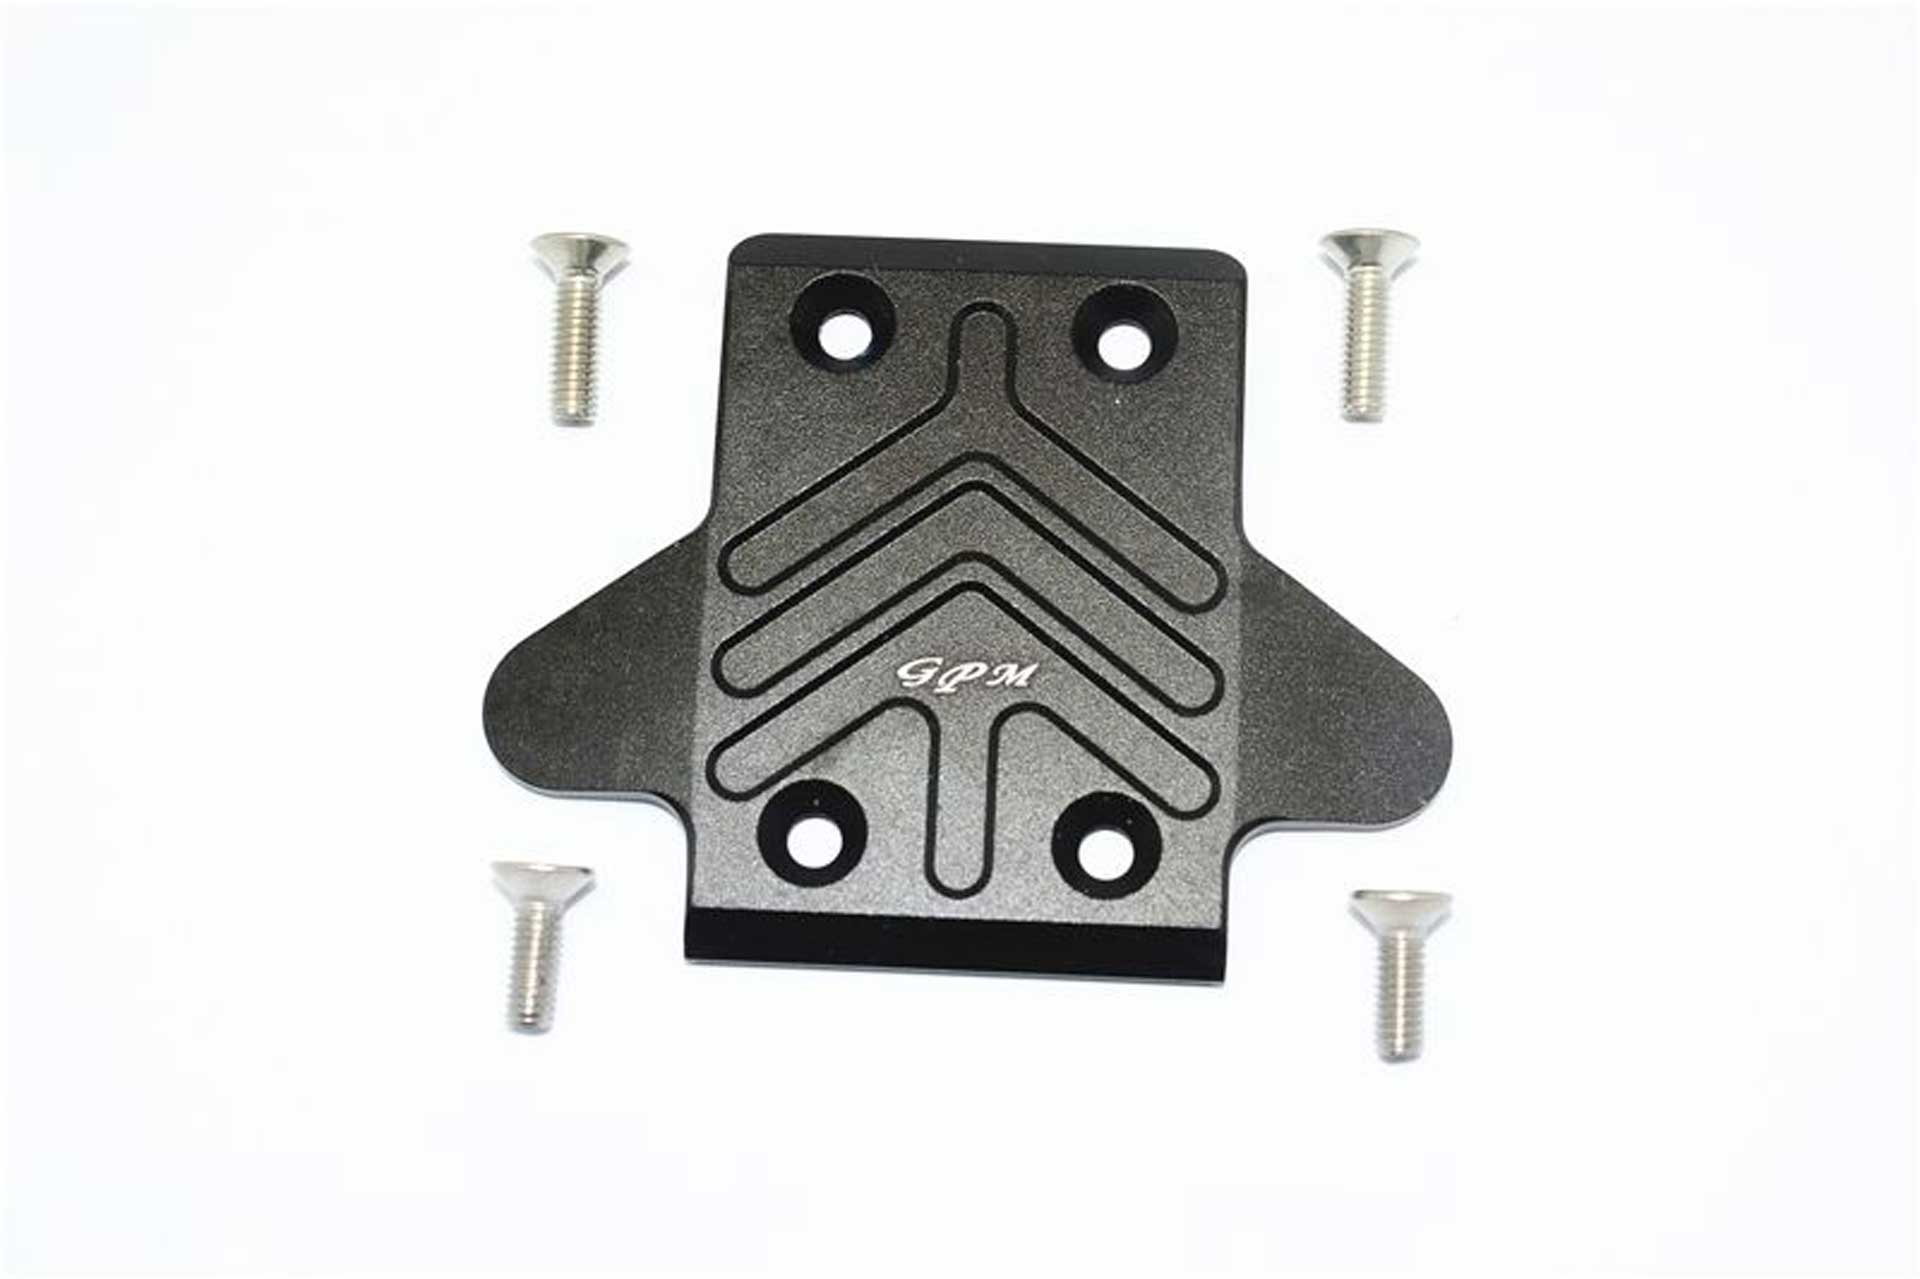 GPM ALUMINUM FRONT CHASSIS PROTECTION PLATE -5PC SET black GPM ARRMA SENTON OUTCAST NOTORIOUS